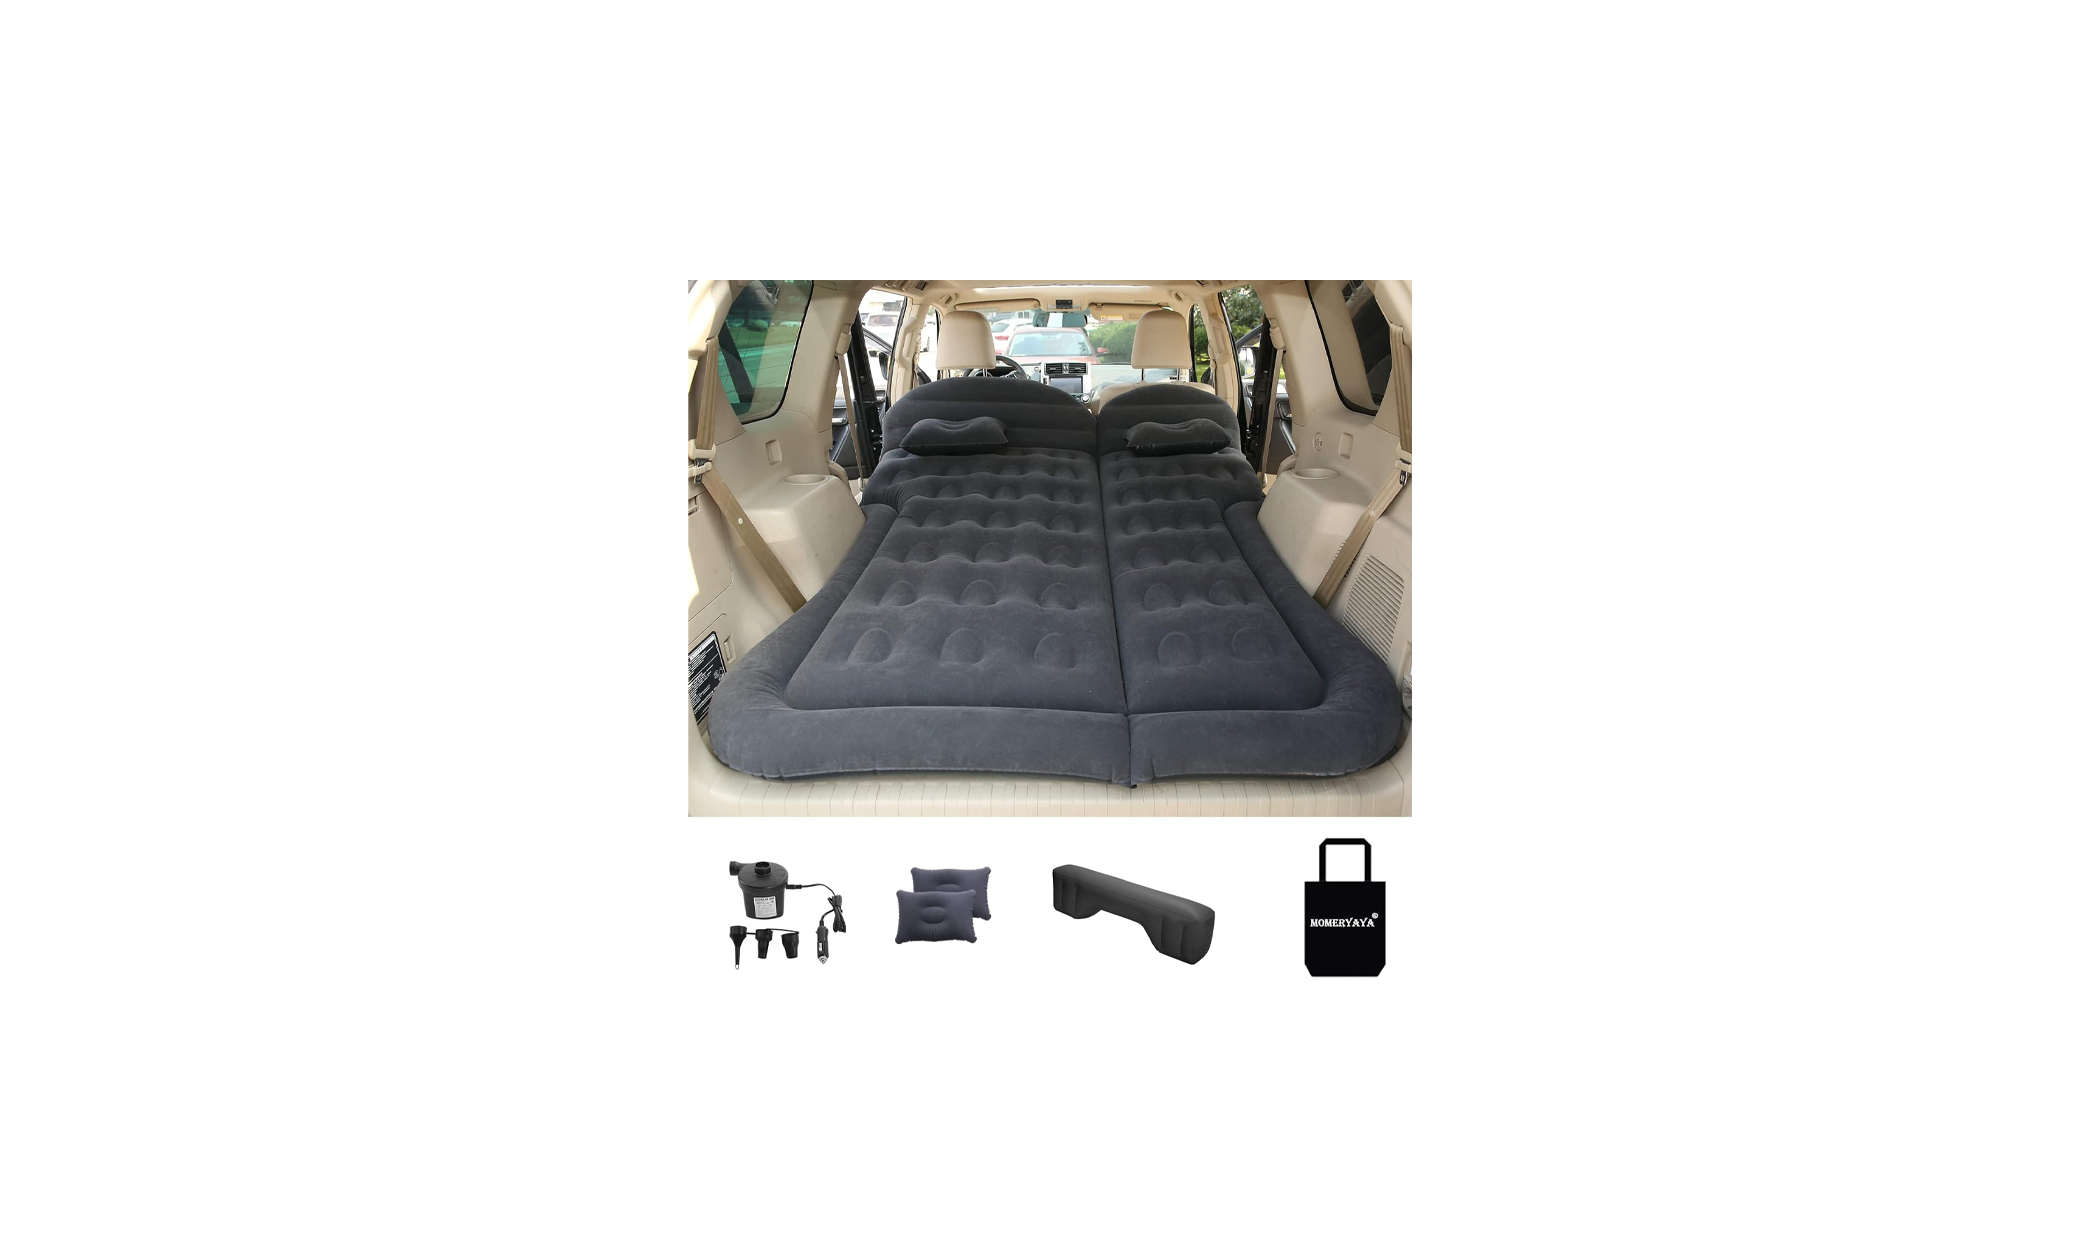 Save 30% on a Truck and SUV Camping Air Mattress! – The Savvy Sampler